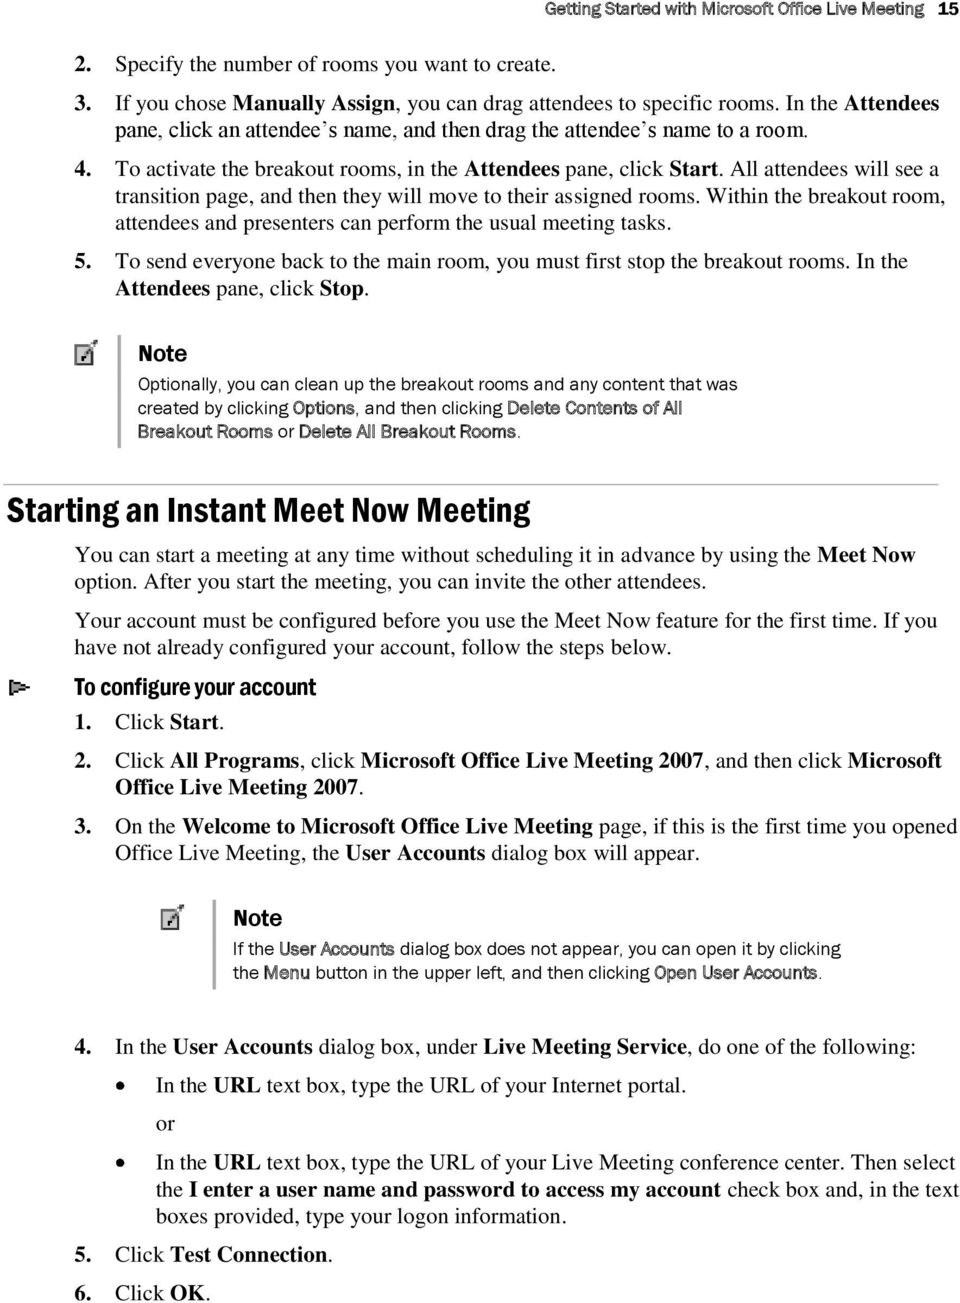 All attendees will see a transition page, and then they will move to their assigned rooms. Within the breakout room, attendees and presenters can perform the usual meeting tasks. 5.